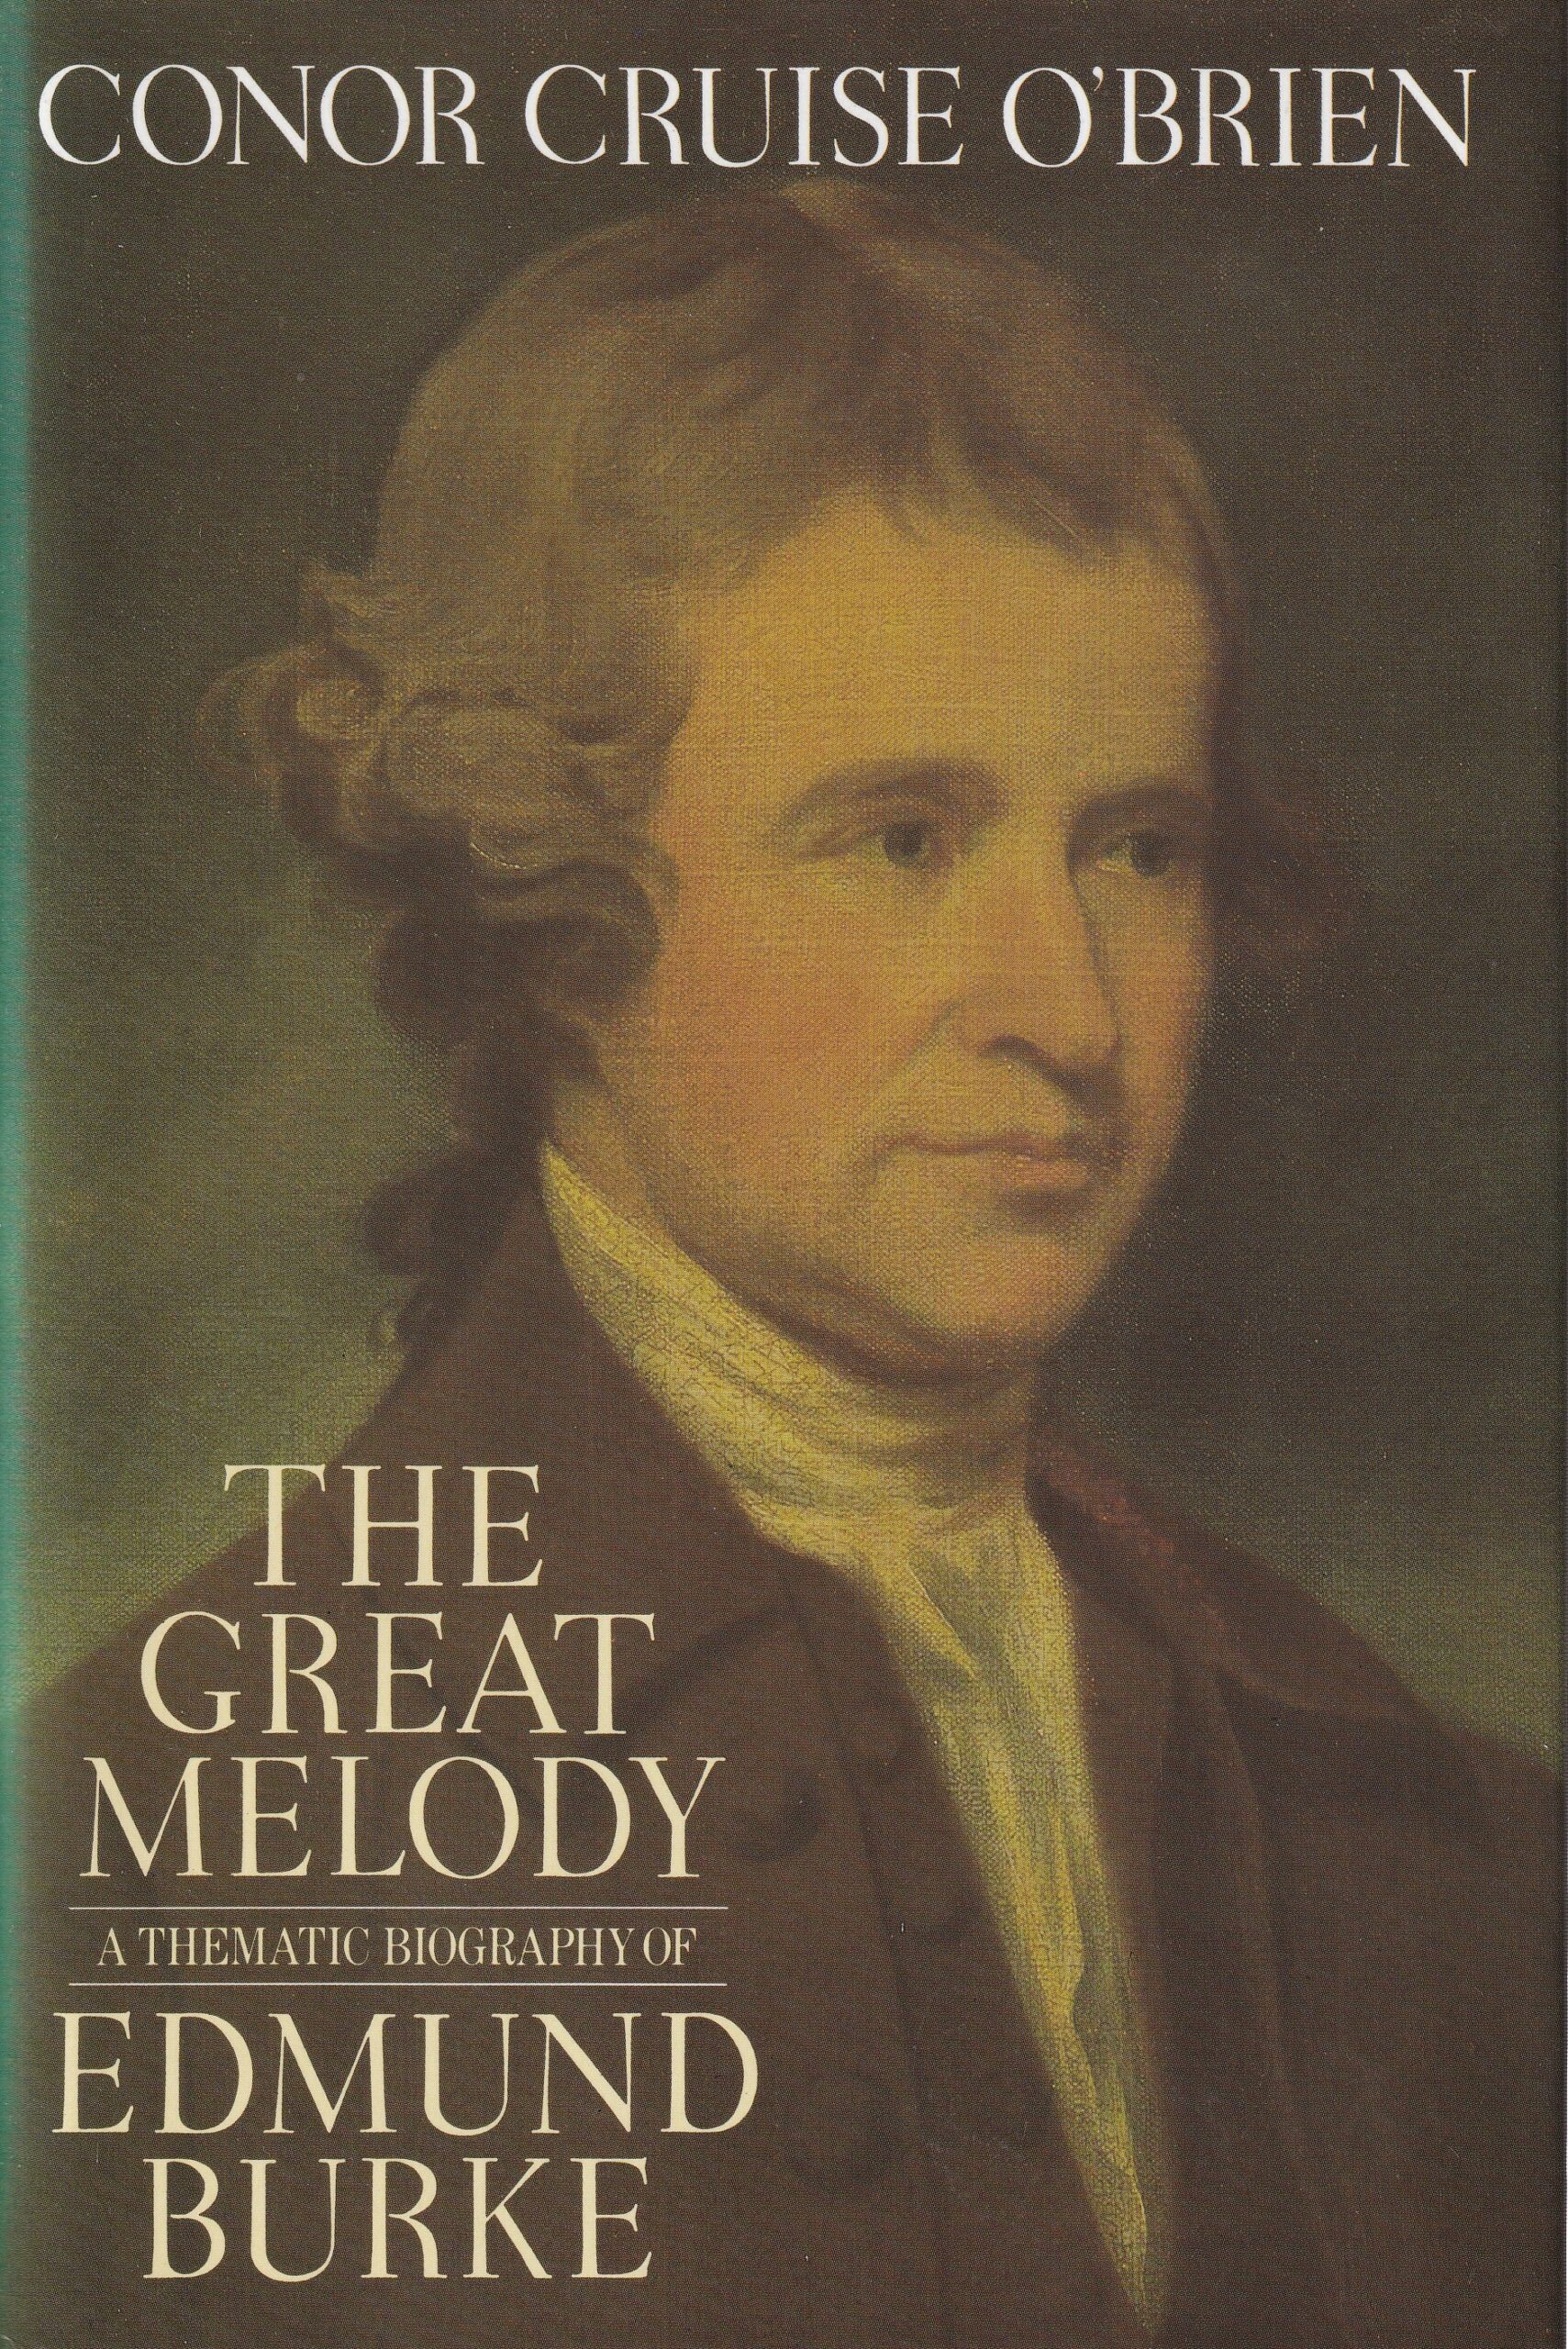 The Great Melody: A Thematic Biography of Edmund Burke | Conor Cruise O'Brien | Charlie Byrne's